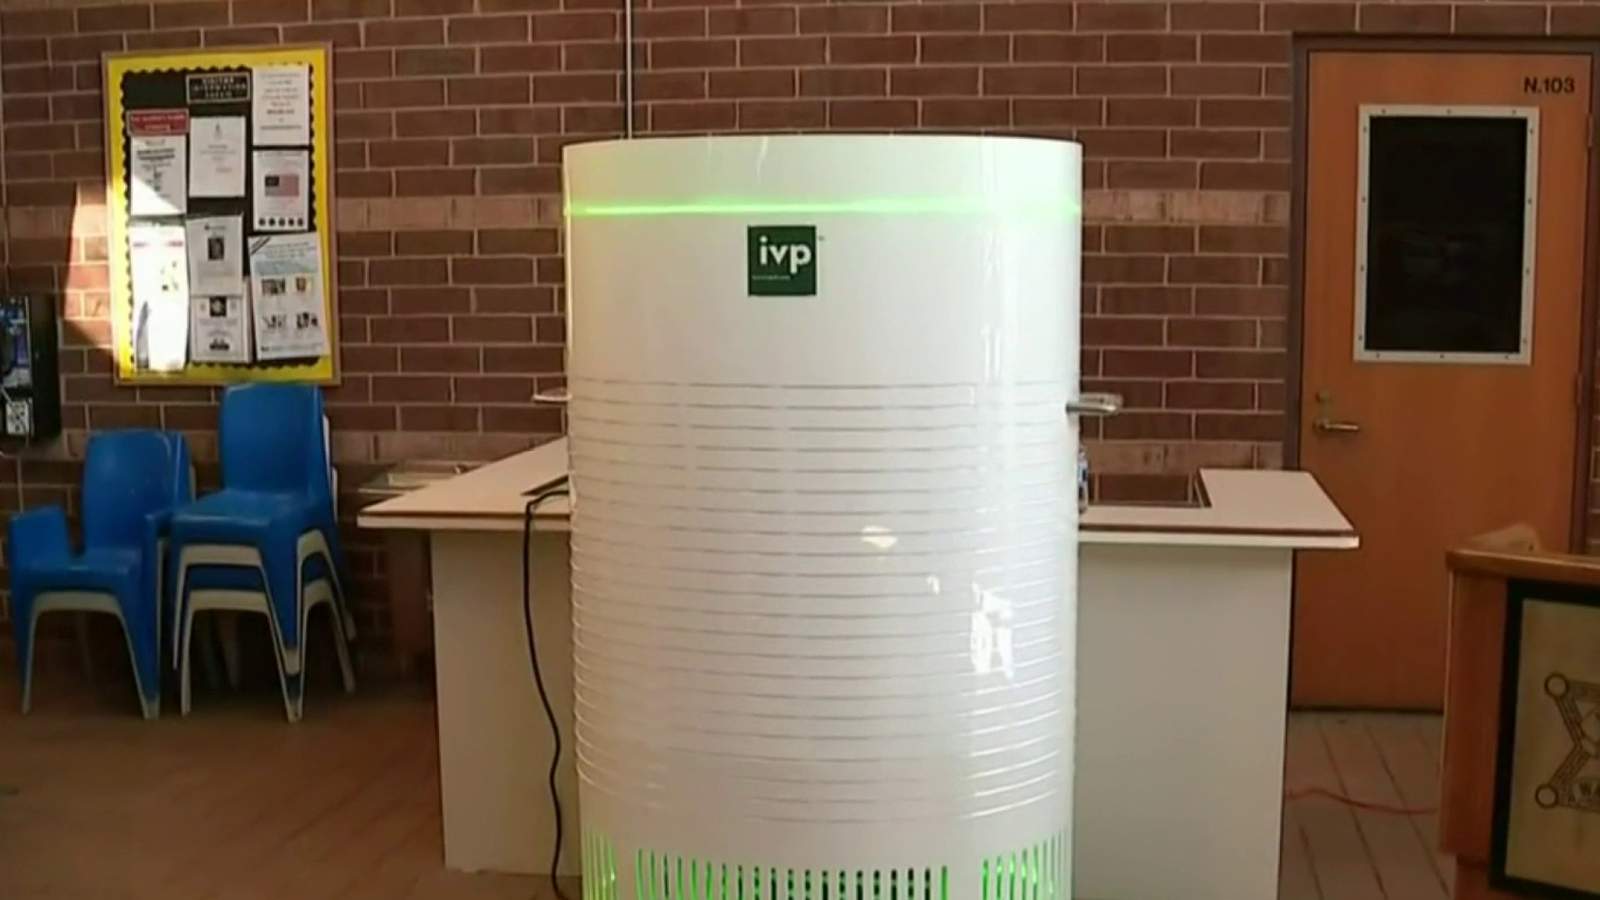 Wayne County officials unveil new COVID air technology to help slow spread in jails